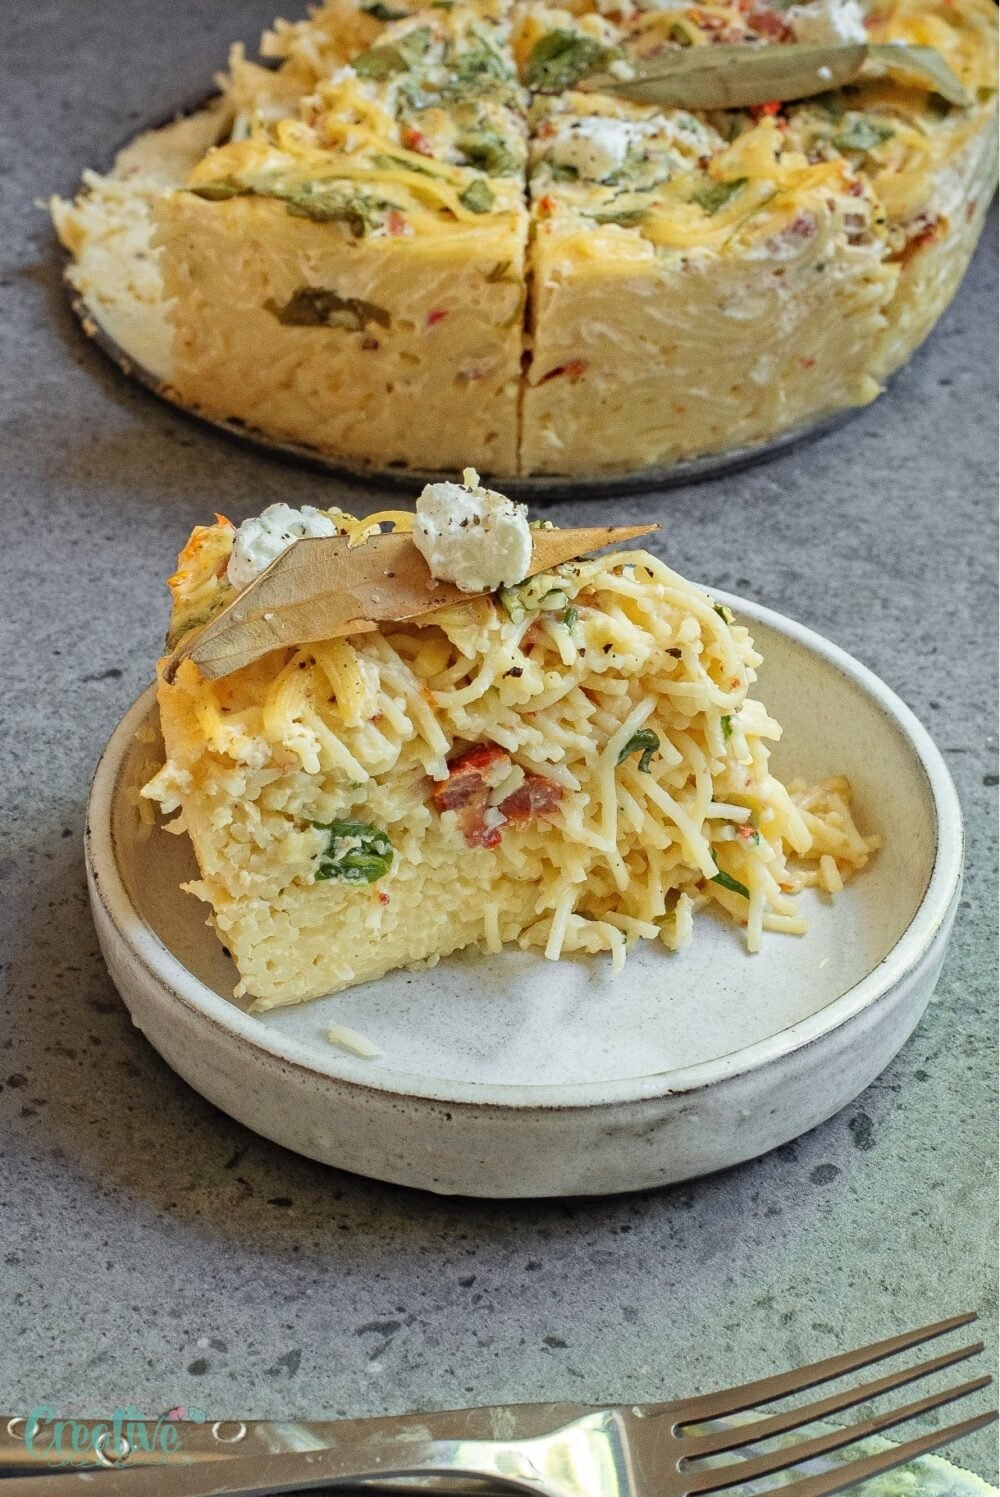 Not only is this spaghetti cake recipe a tasty option for family dinners, but it's also perfect for meal prep.